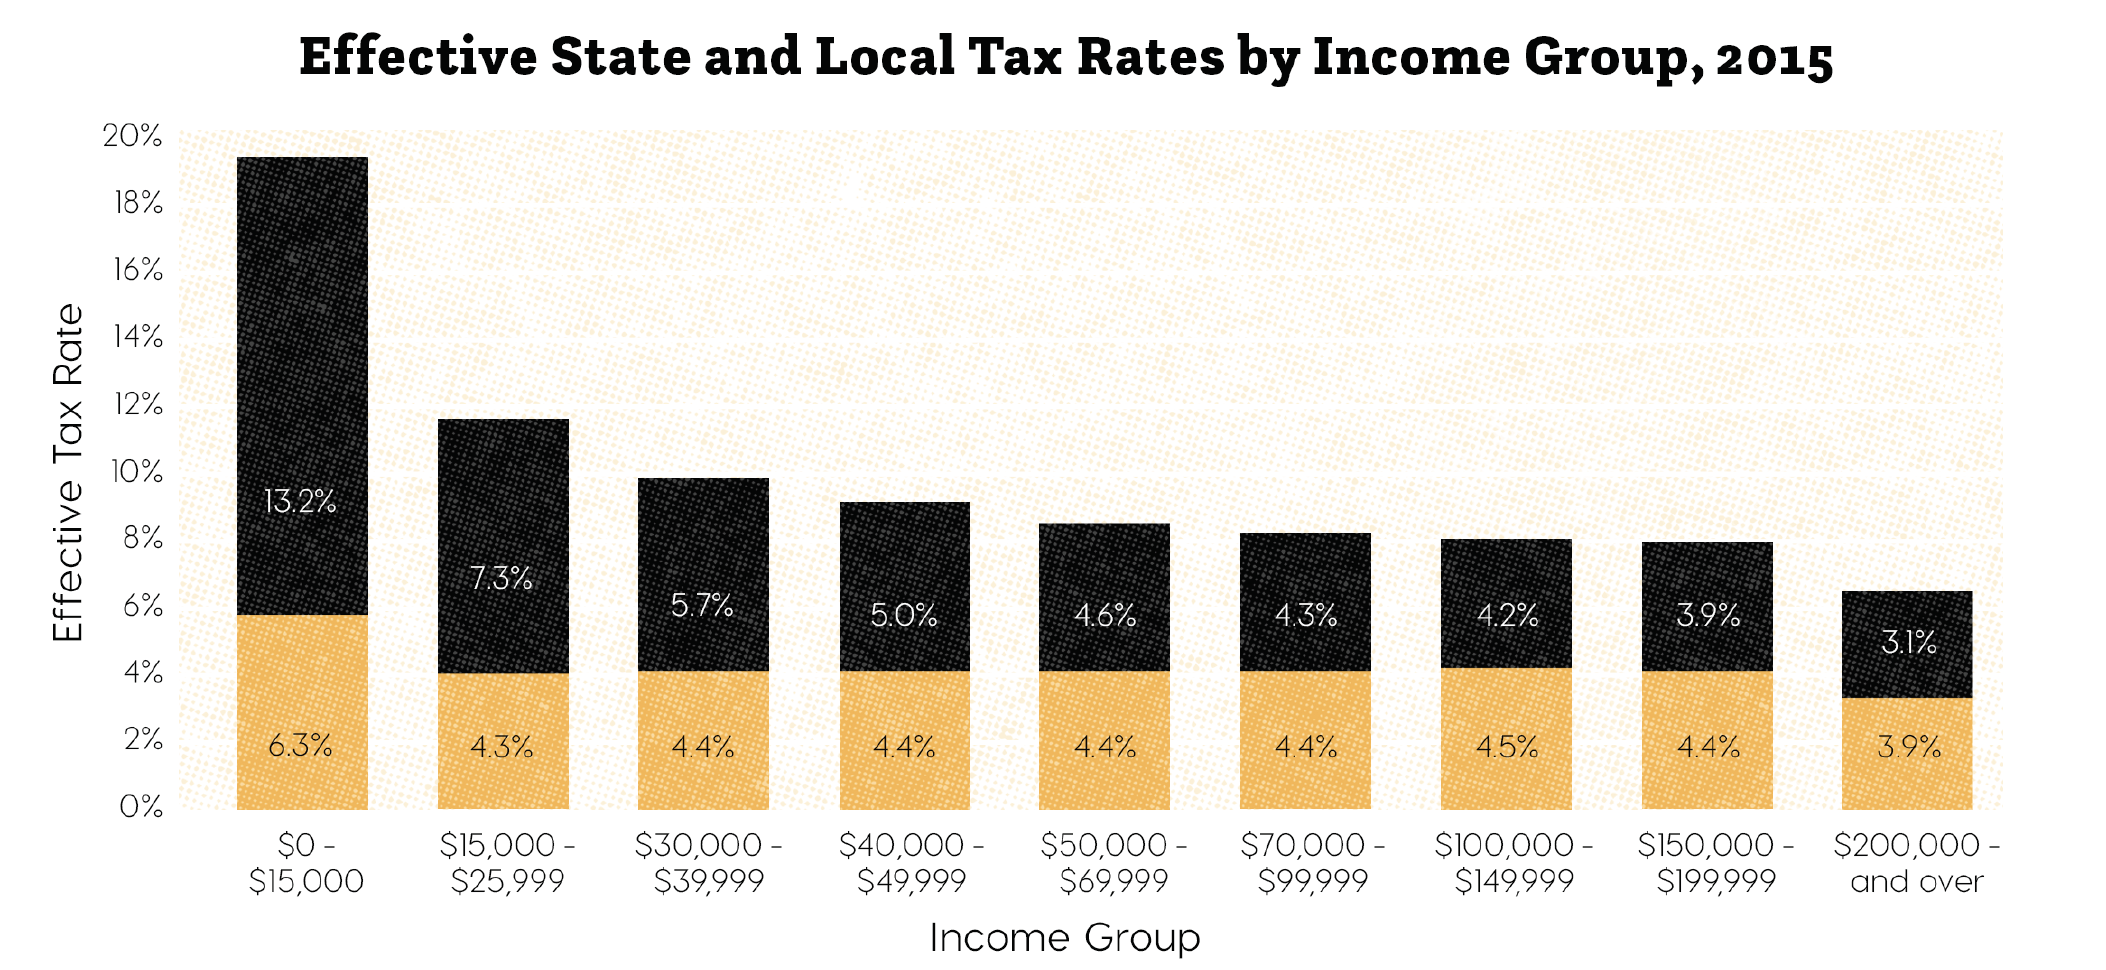 Bar chart depicting the effective state and local tax rates by income group for the year 2015, showing a "Double Whammy" trend with higher rates for lower incomes and vice versa.